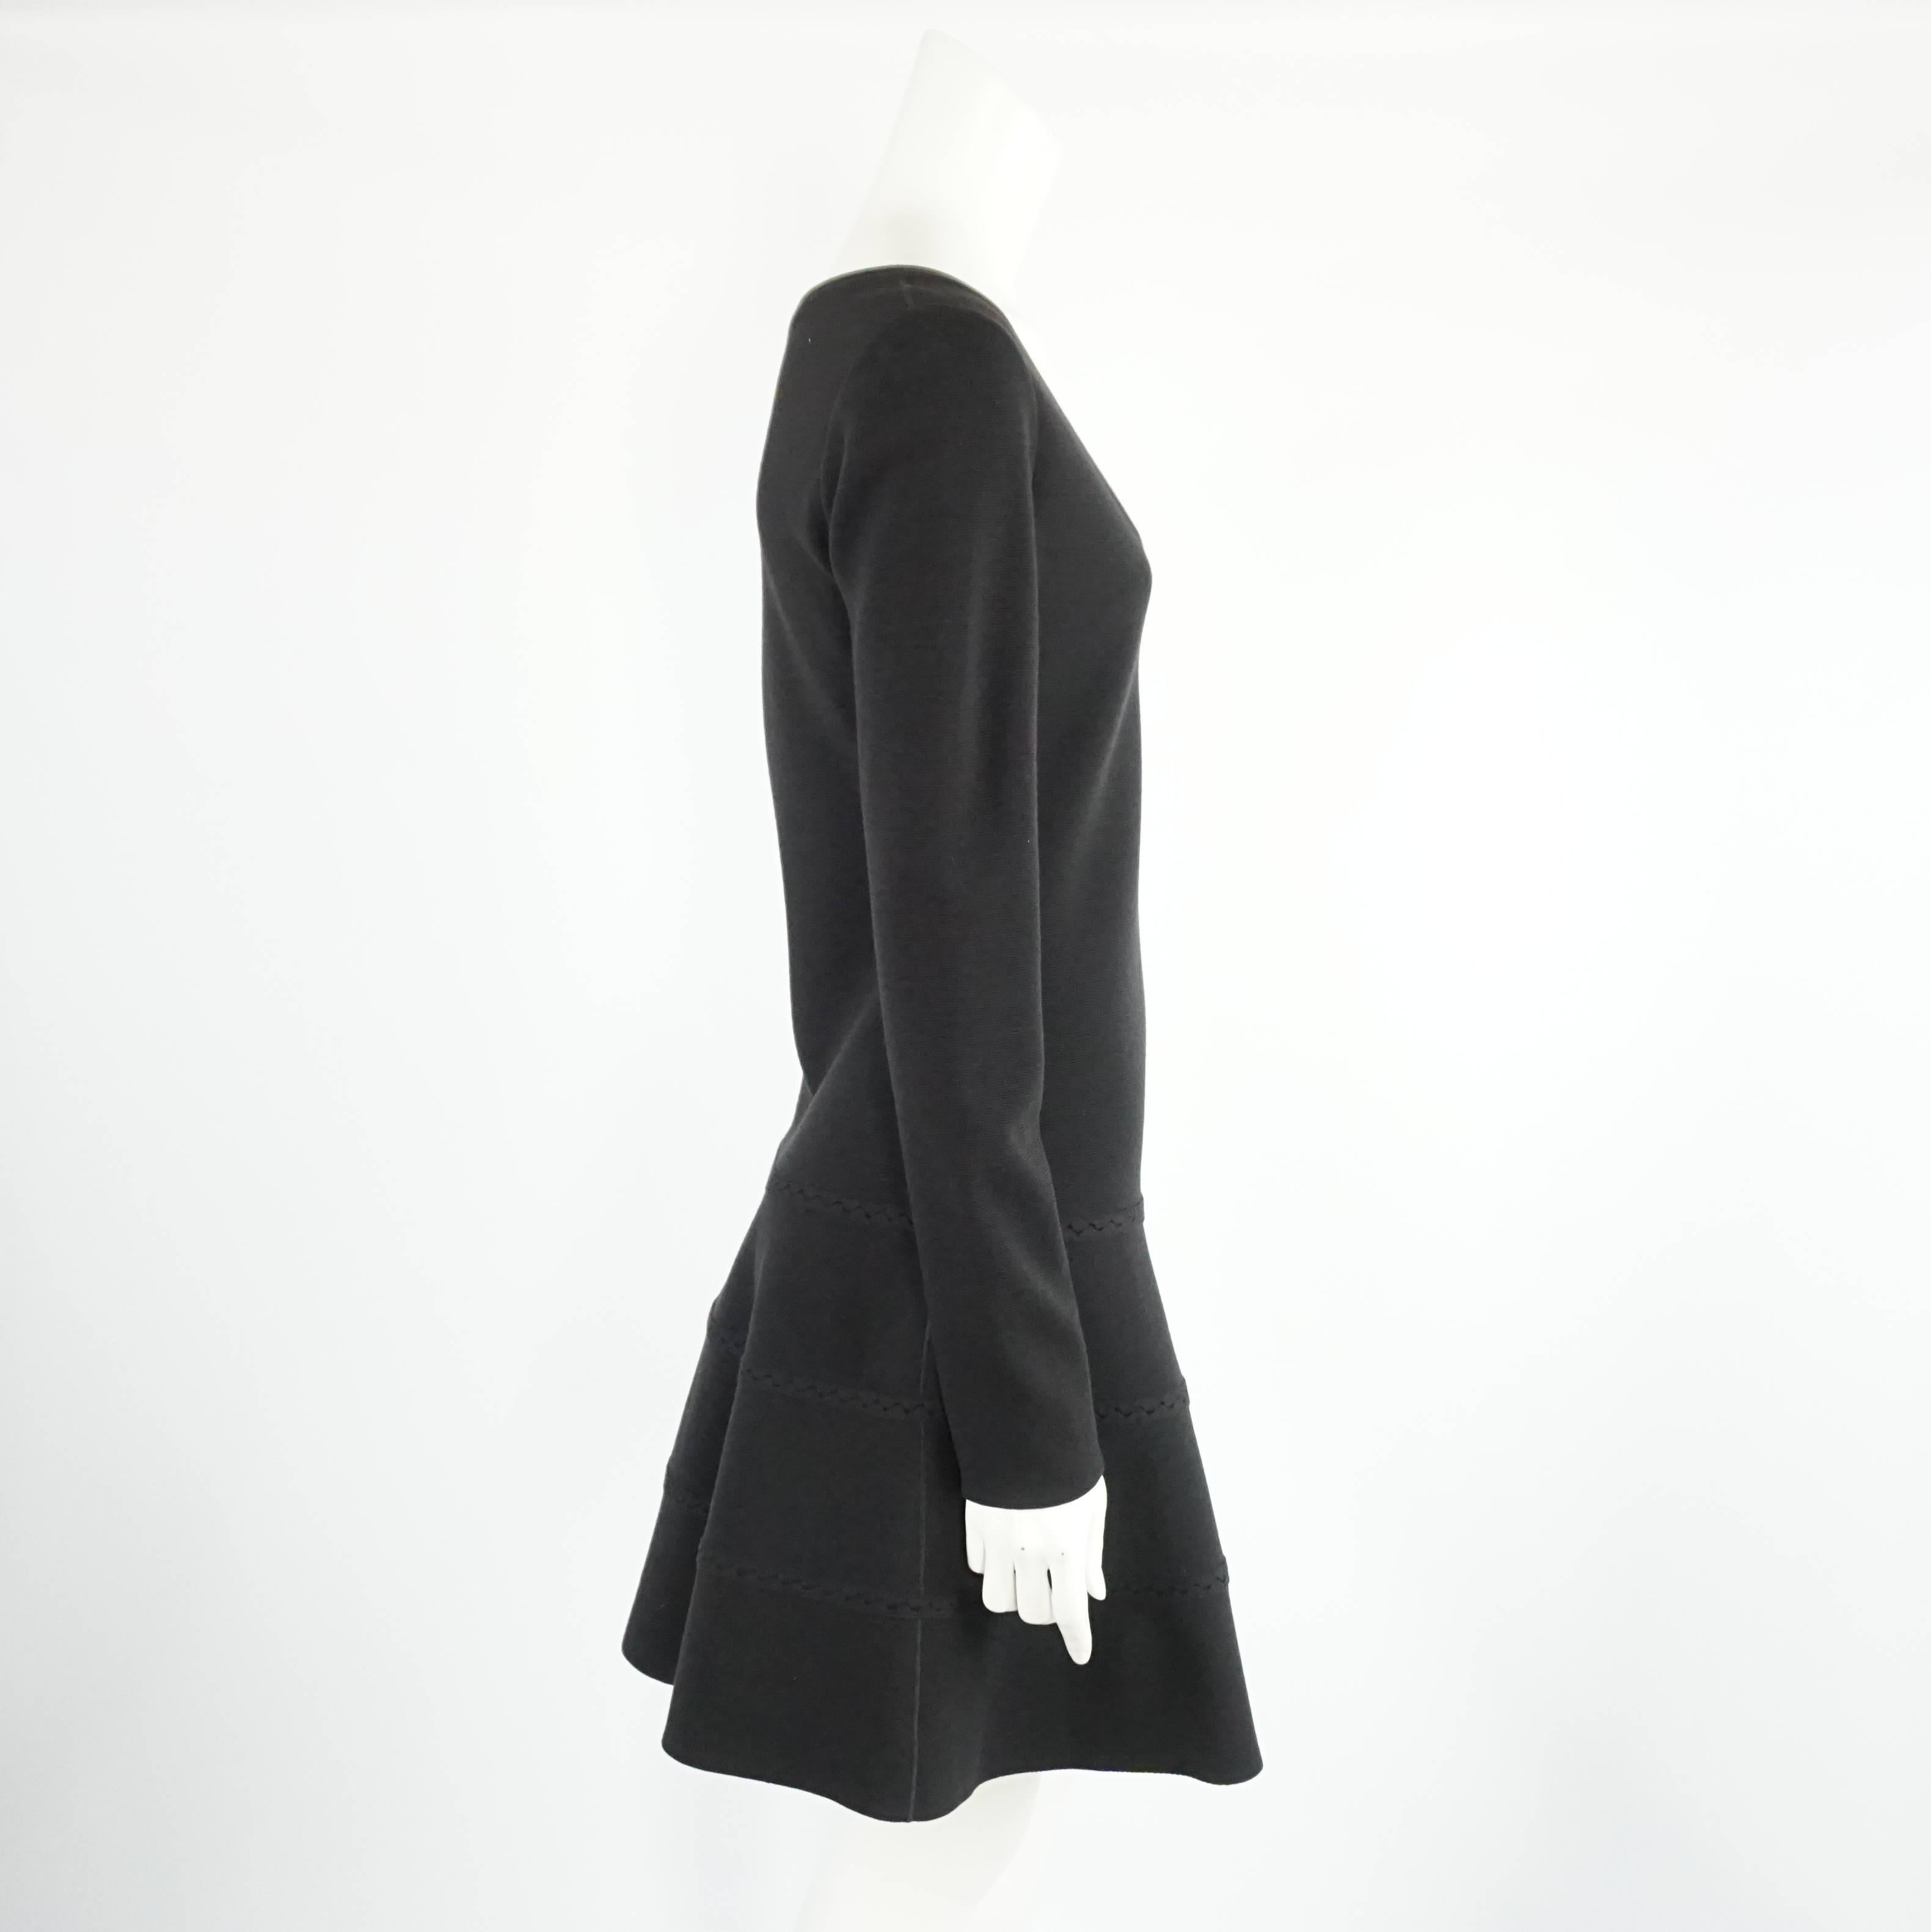 This Azzedine Alaia dress is a staple for fall and winter. The dress has a classic shape and features a v-neck, flare skirt, and knit detail on the bottom. It is in excellent condition with minimal wear. Size L, circa 21st century.